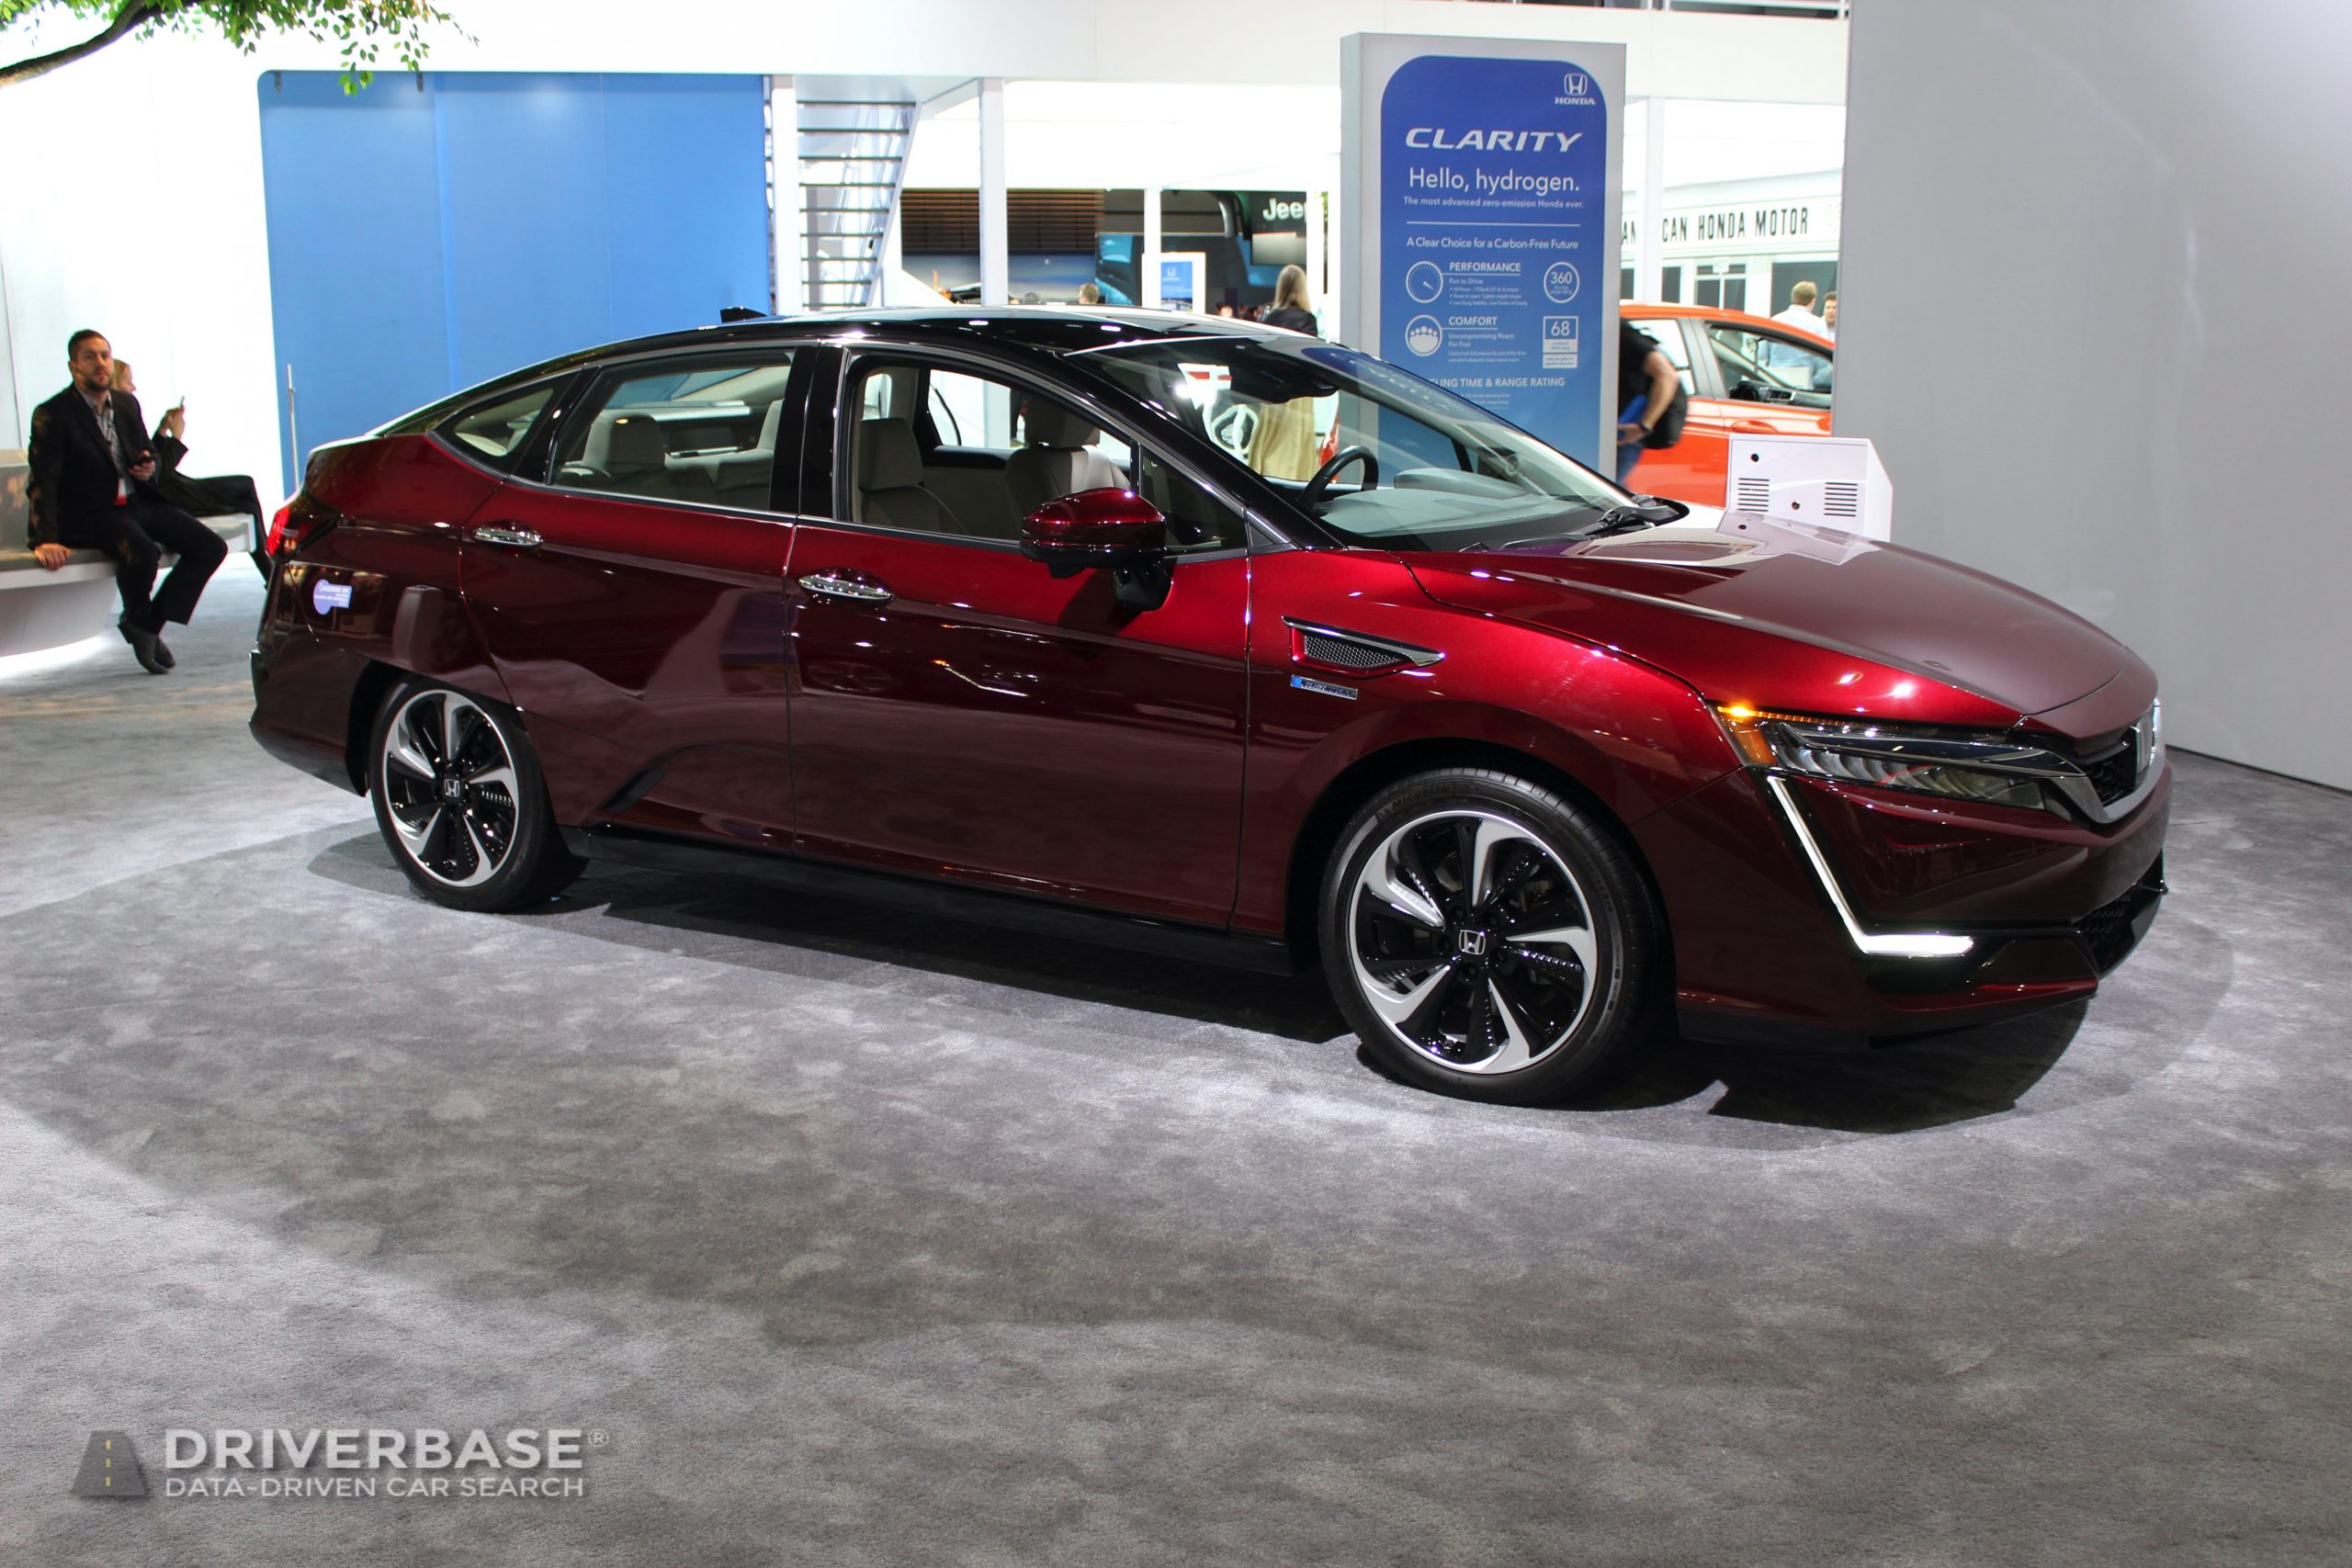 2020 Honda Clarity Fuel Cell at the 2019 Los Angeles Auto Show